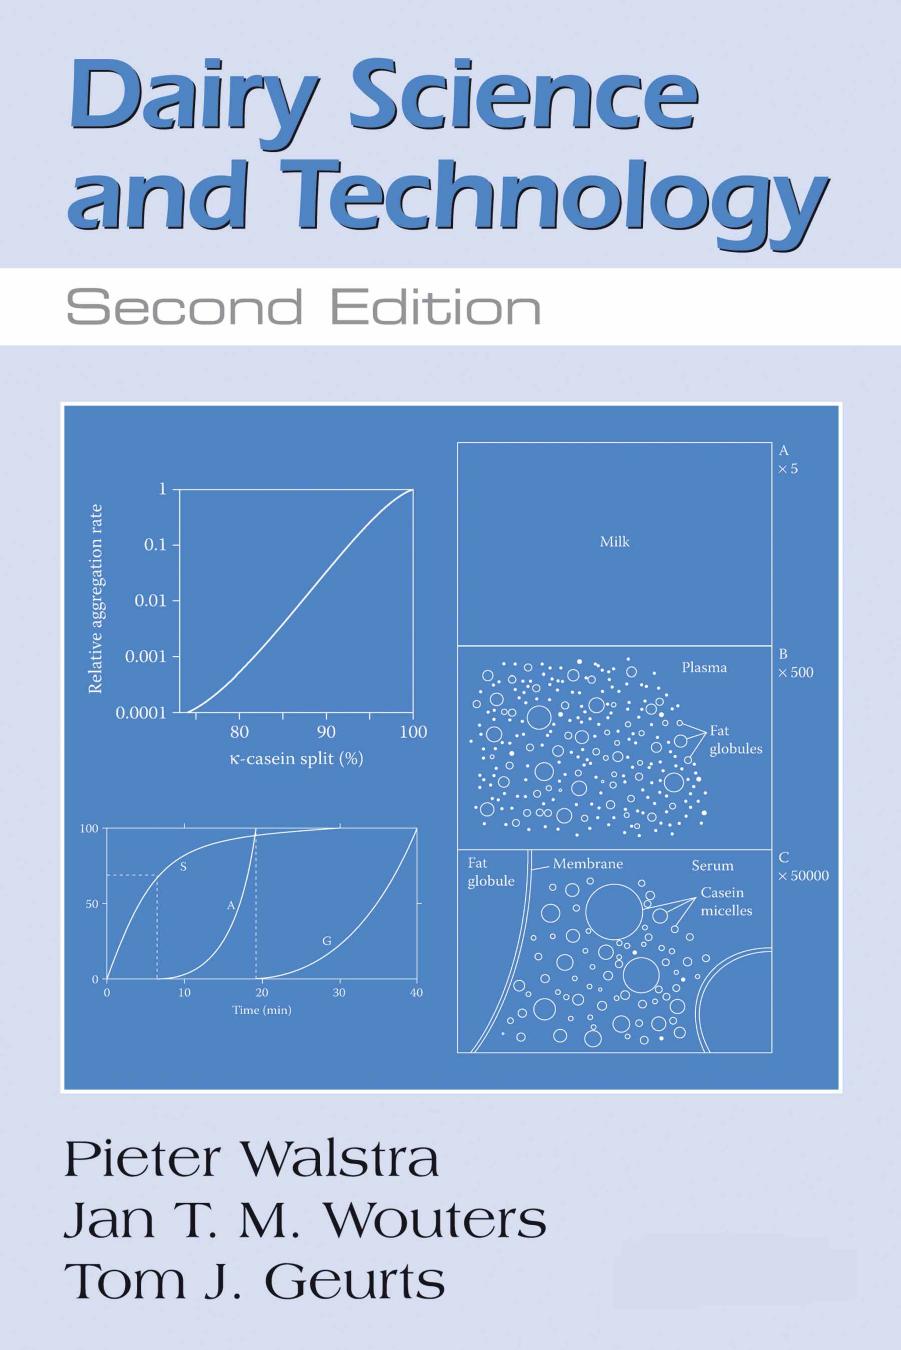 Dairy Science and Technology, Second Edition 2006